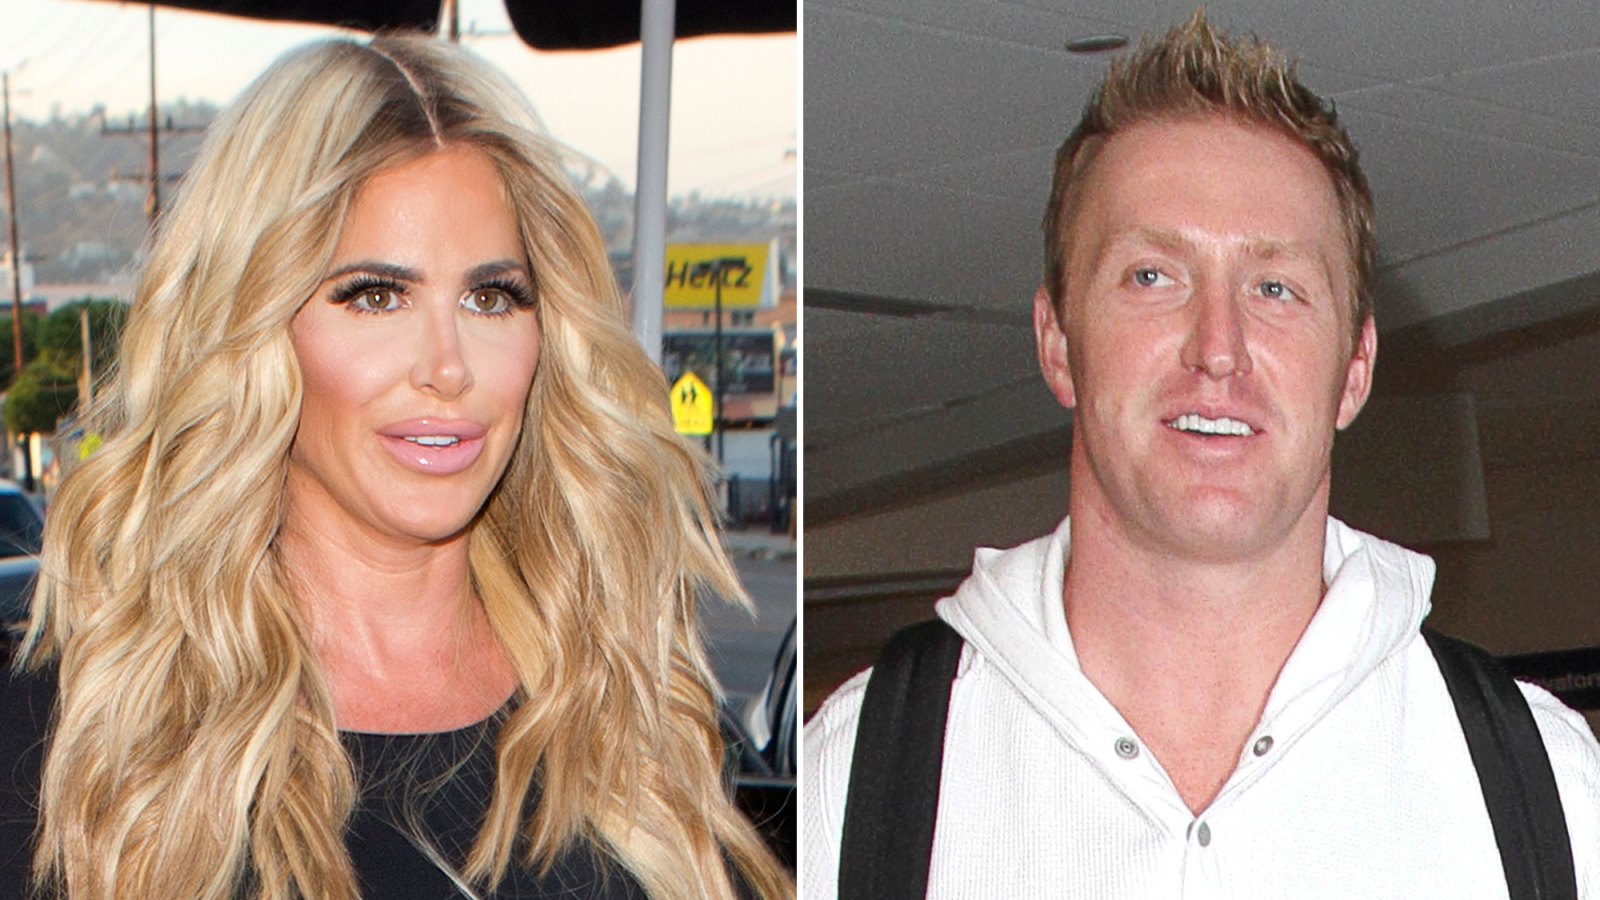 Kim Zolciak Says She Couldn't Punch Kroy Biermann 'If I Wanted to Because of My Nails'